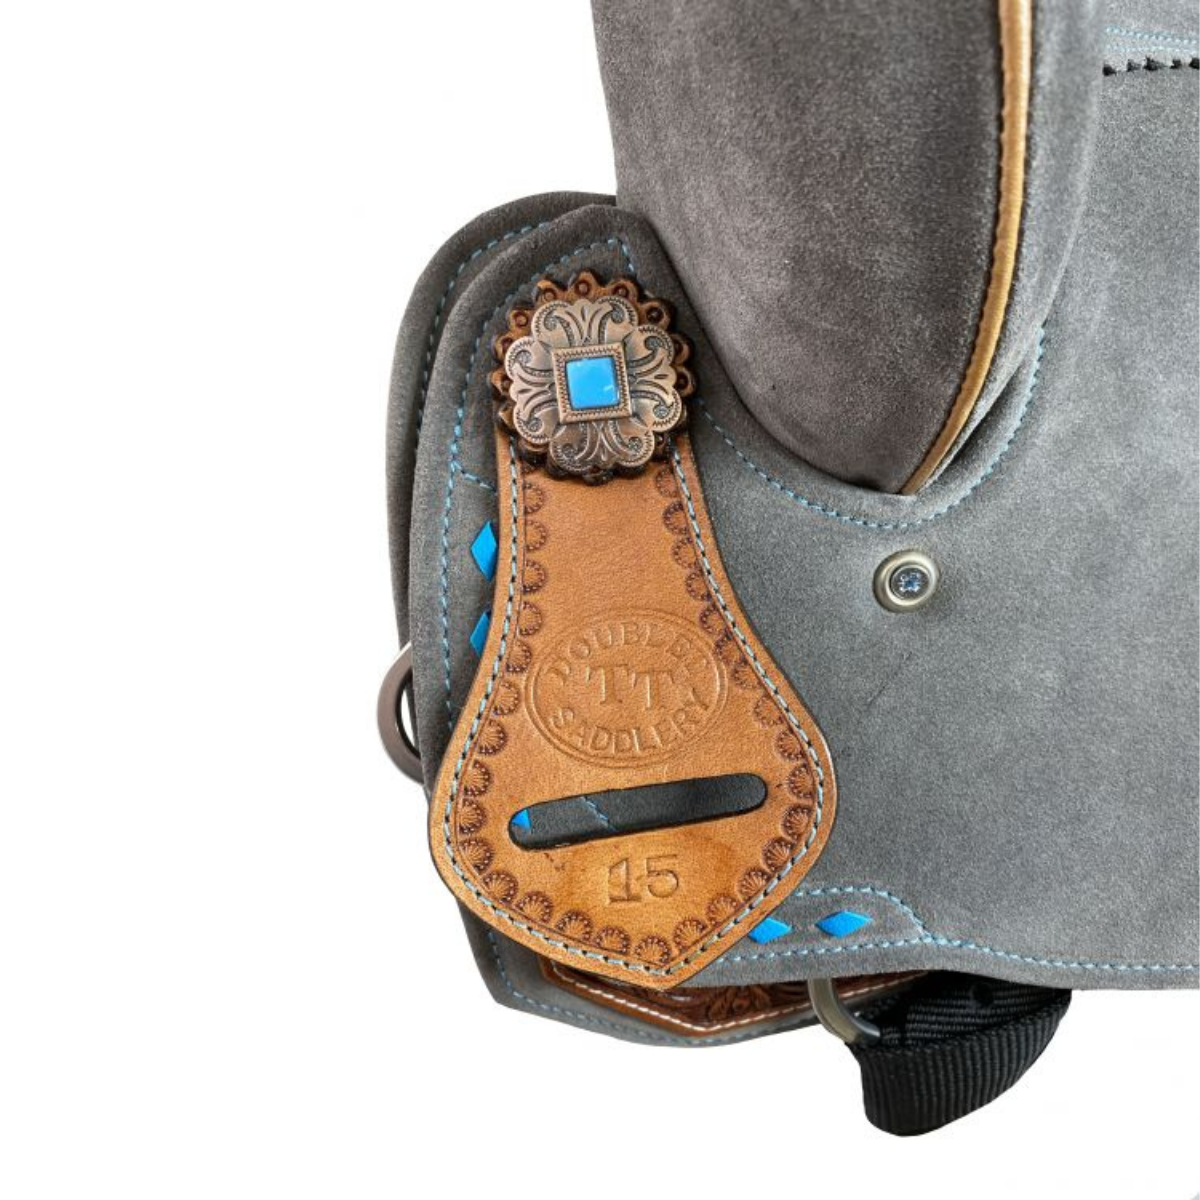 15" Double T Gray Suede Barrel Style Saddle With Teal Buckstitching - Double T Saddles